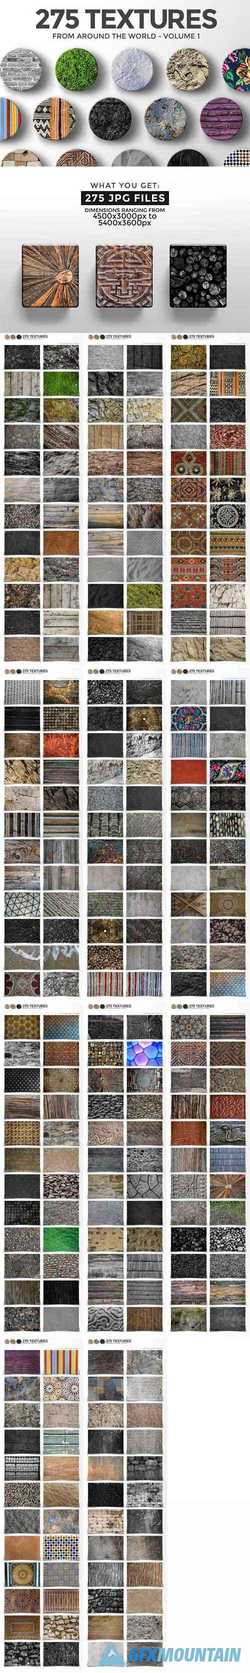 275 TEXTURES FROM AROUND THE WORLD - 1788384